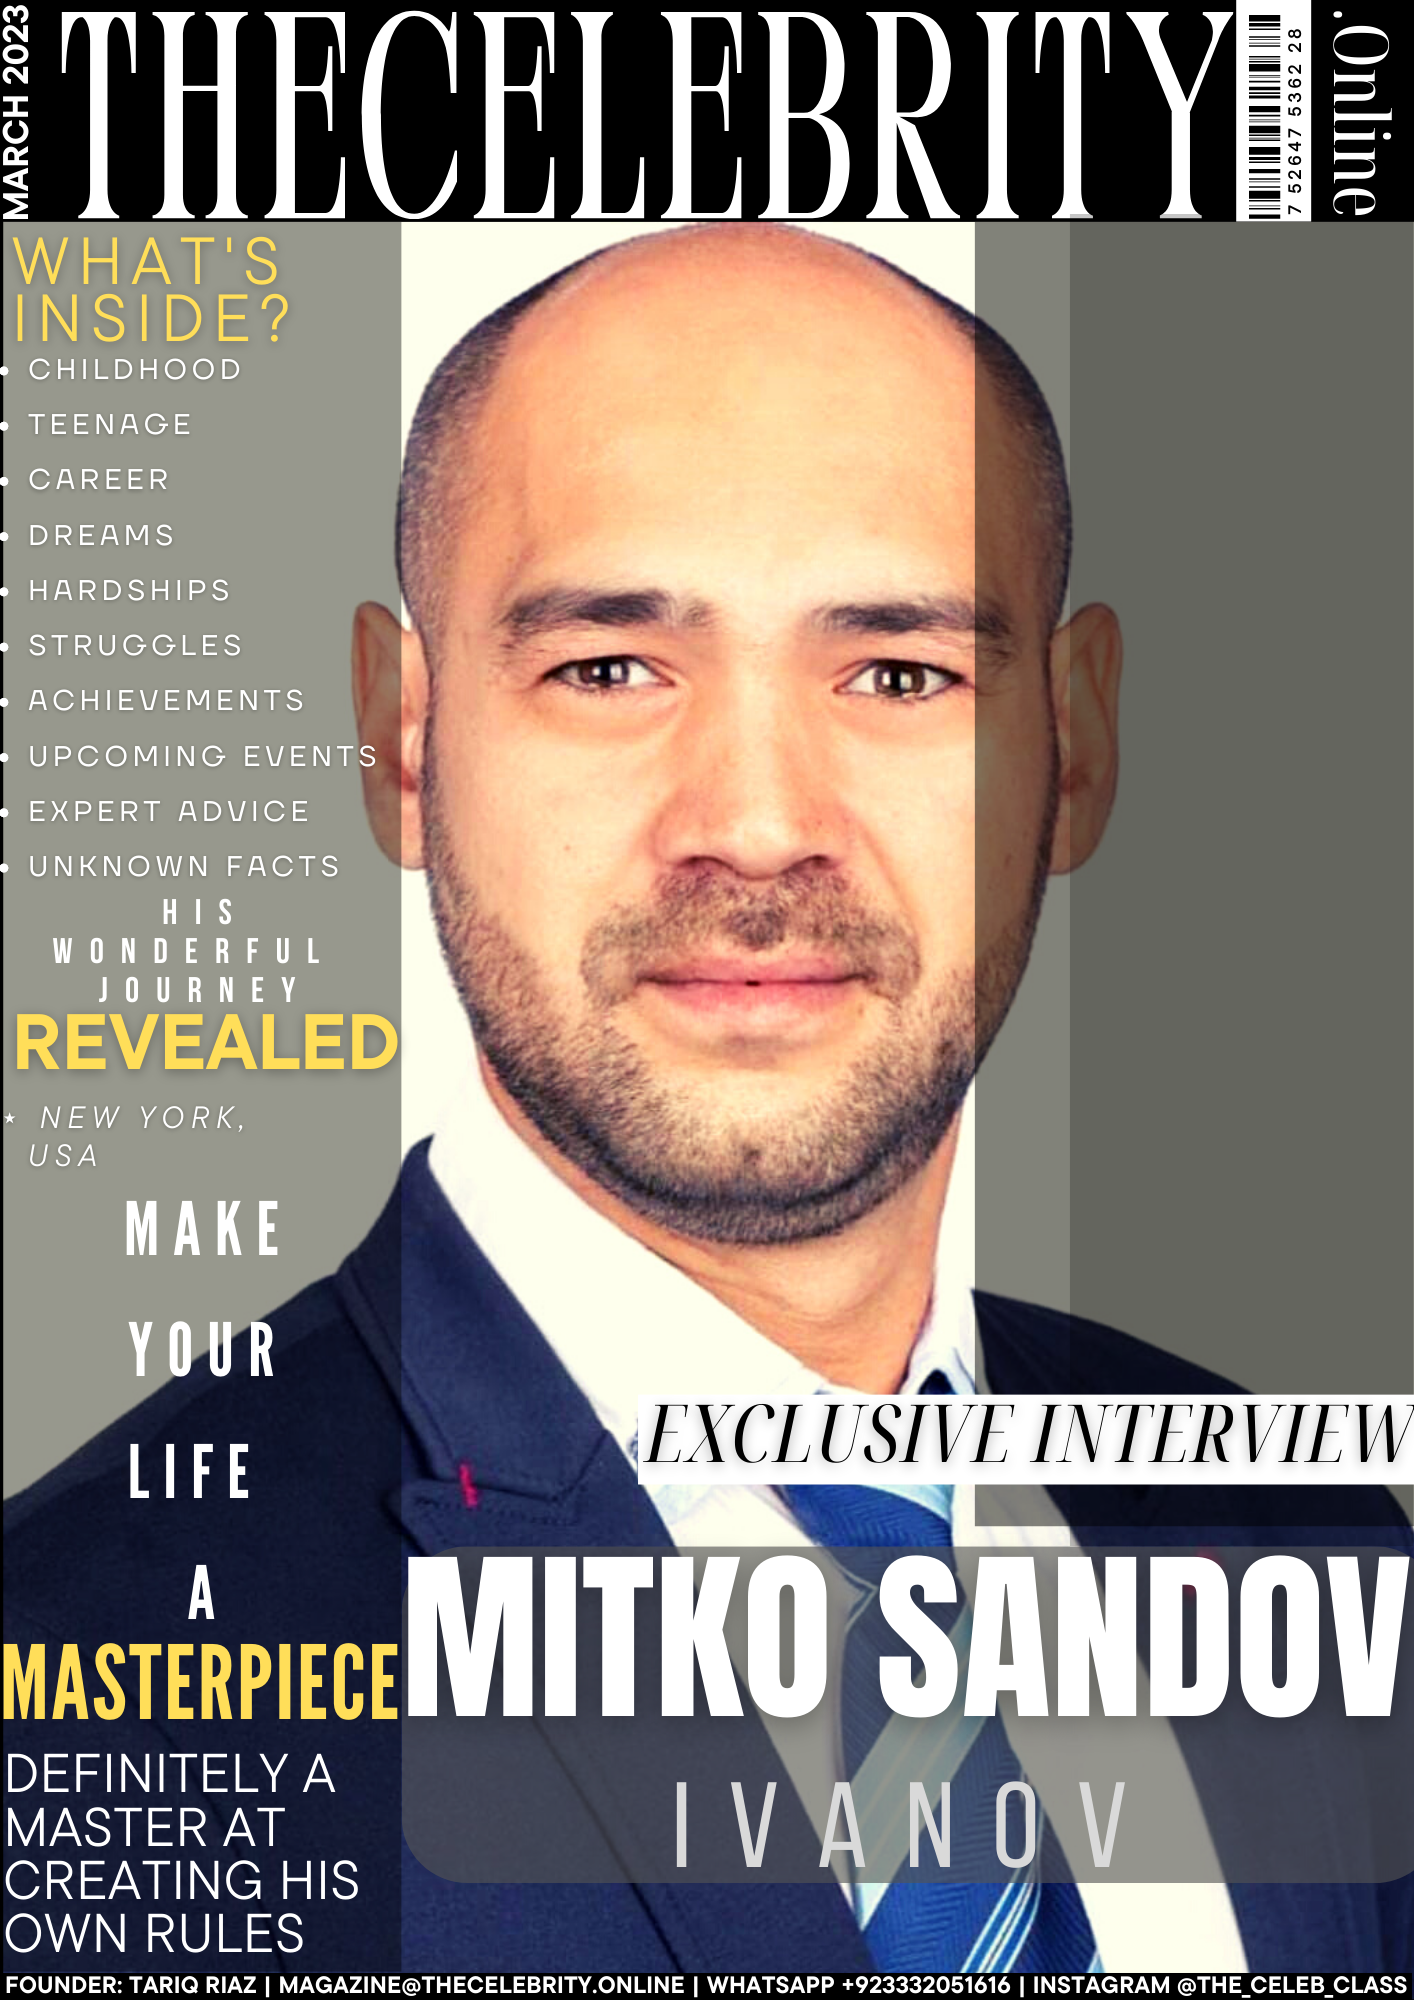 Mitko Sandov Ivanov Exclusive Interview – ‘To Not Stop Fighting For Yourself’